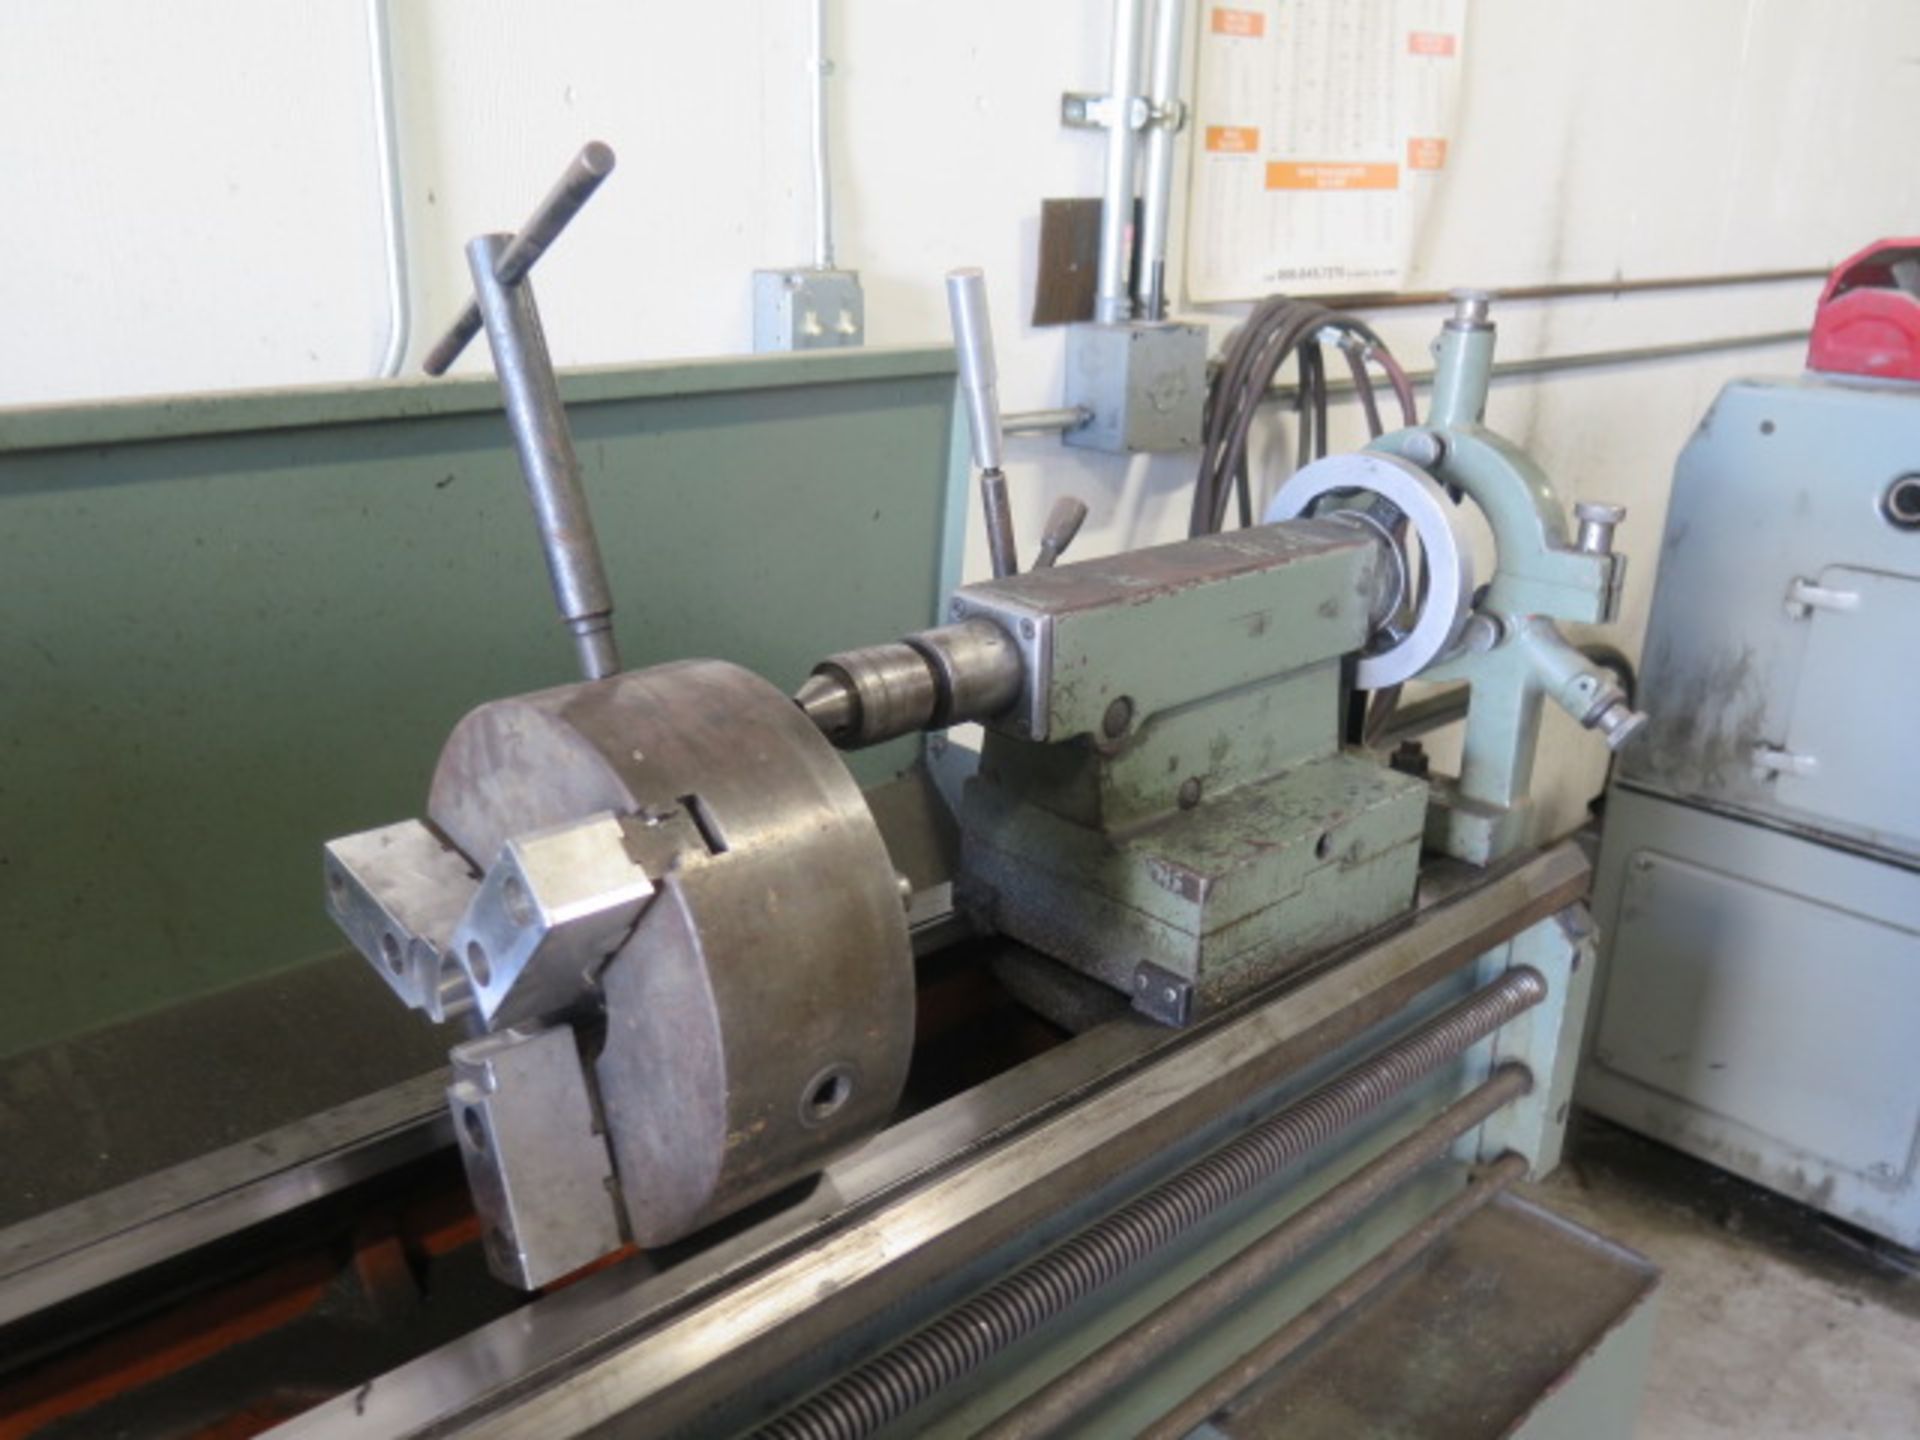 Goodway GW-1660 16" x 60" Geared Head Gap Bed Lathe w/ 33-2000 RPM, Inch/mm Threading, SOLD AS IS - Image 10 of 12